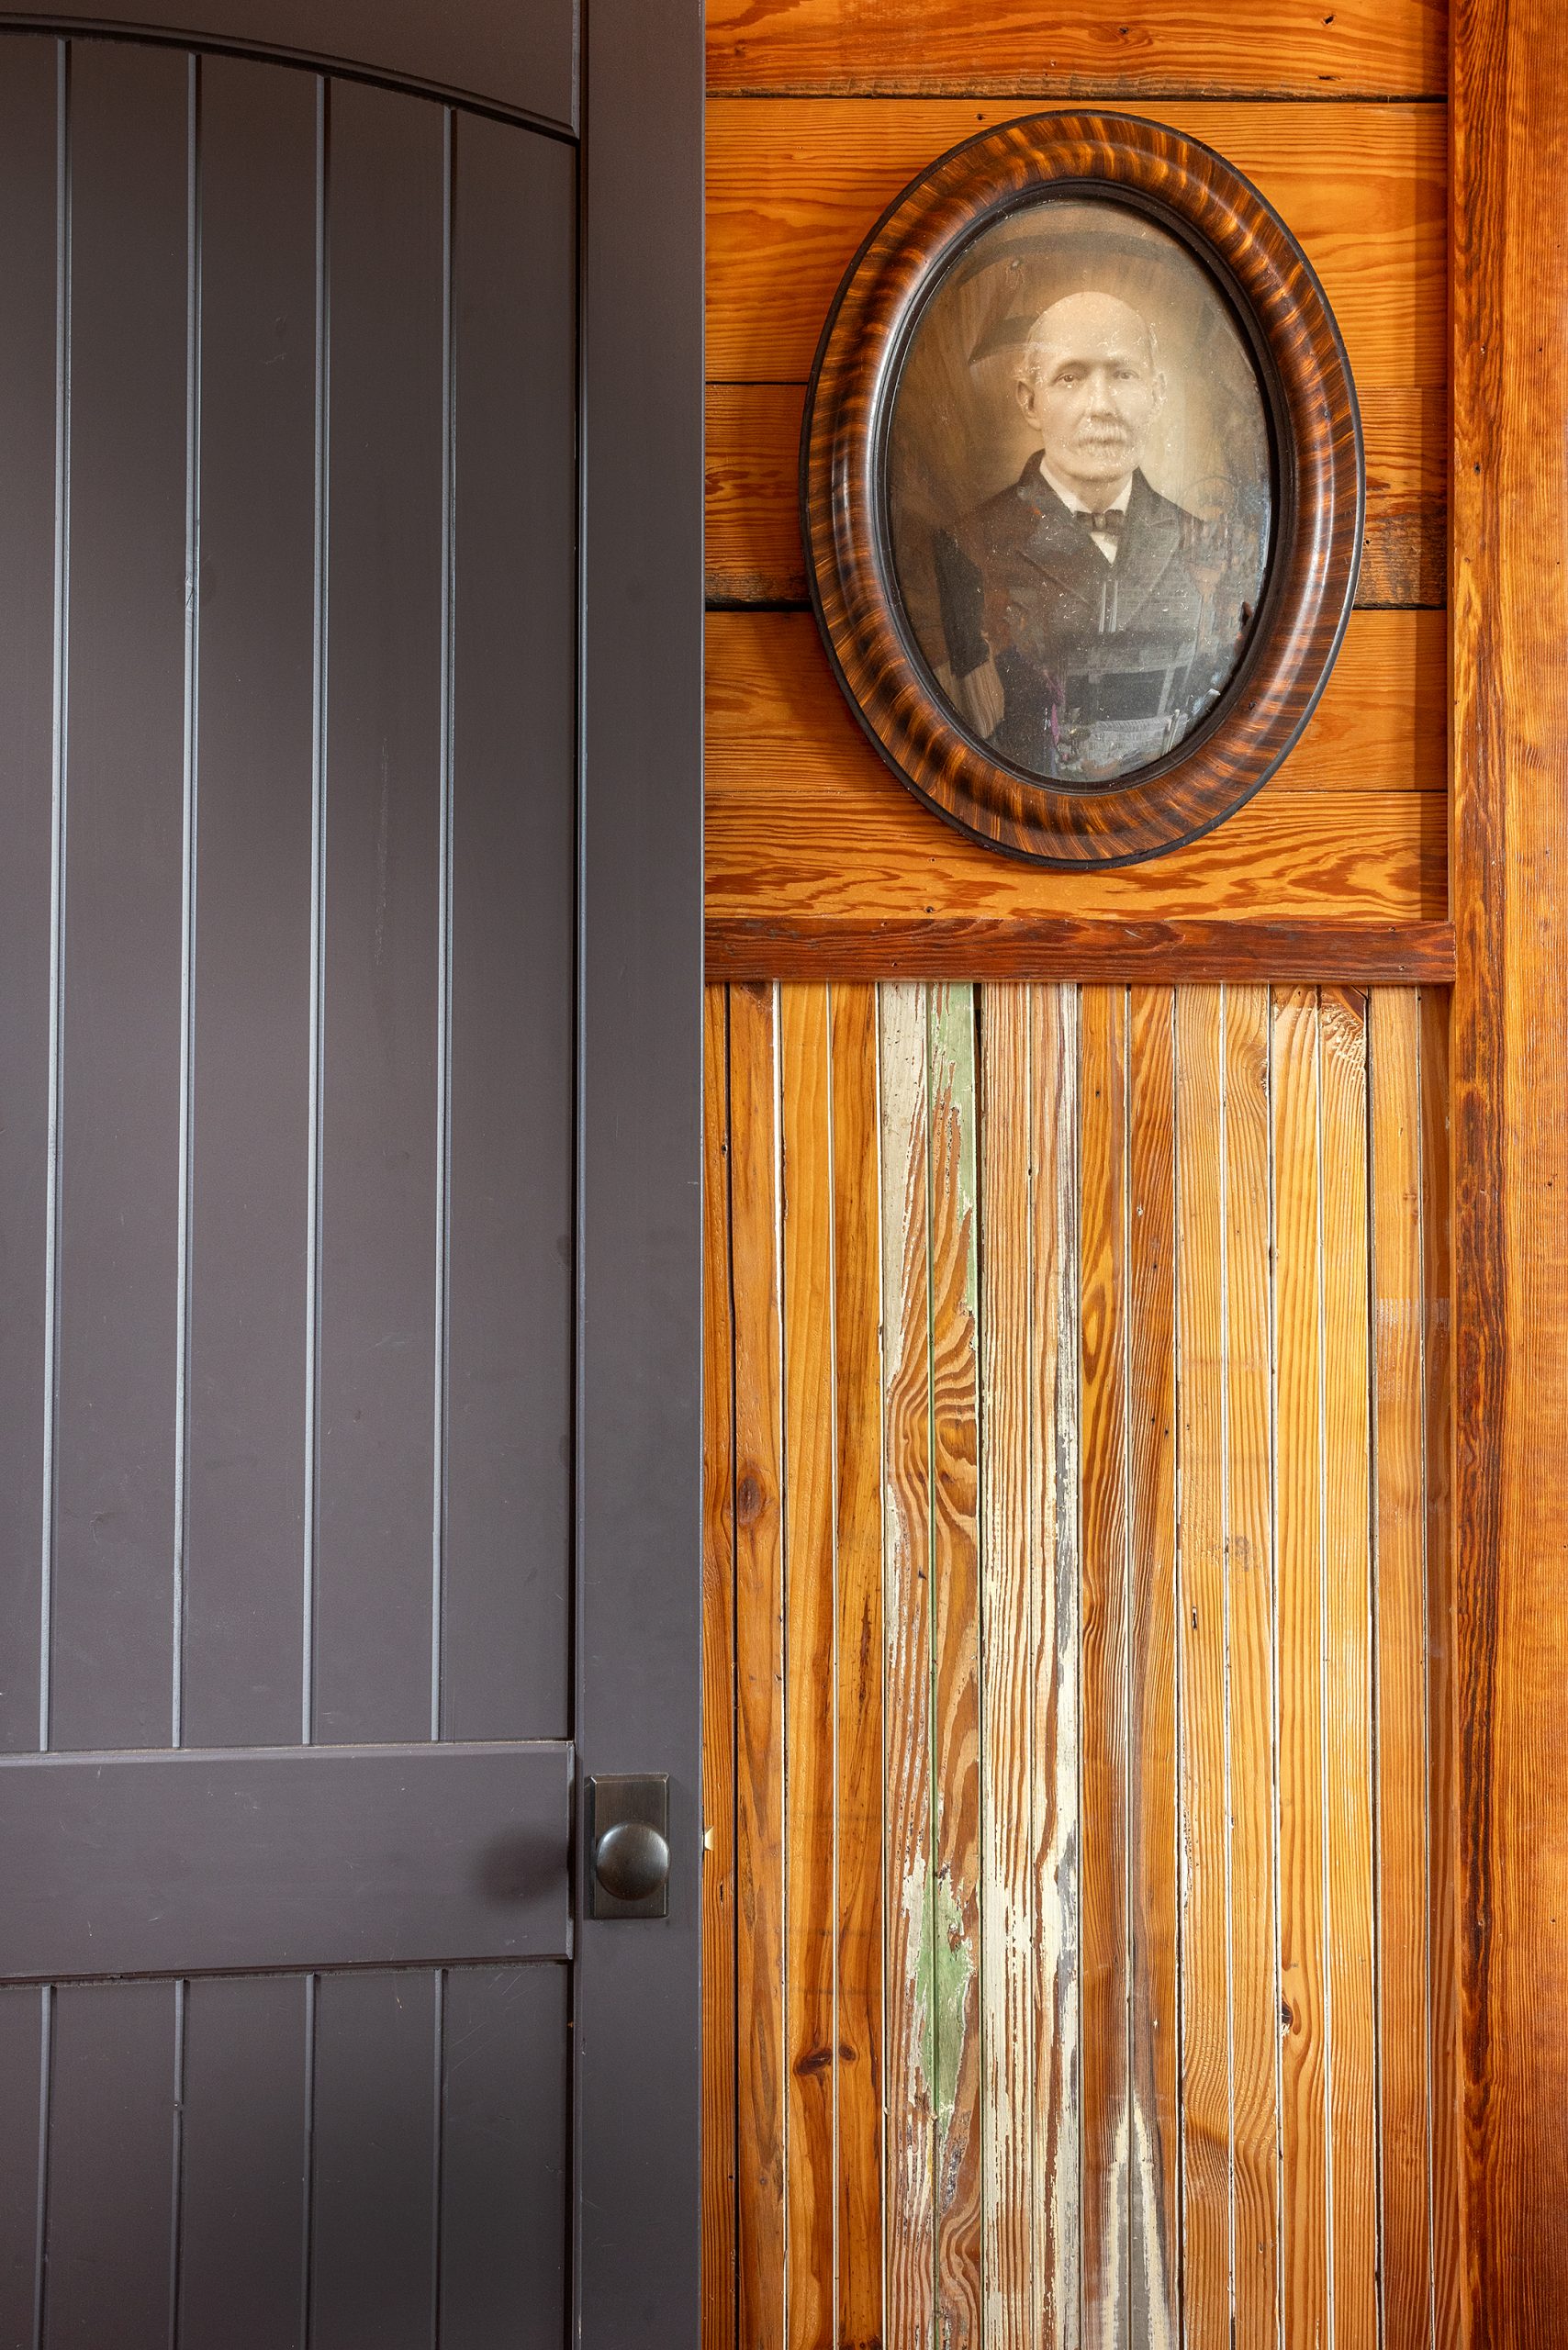 Most of the lodge still has its original pine floors and ceiling, and little pieces of history fill the space.